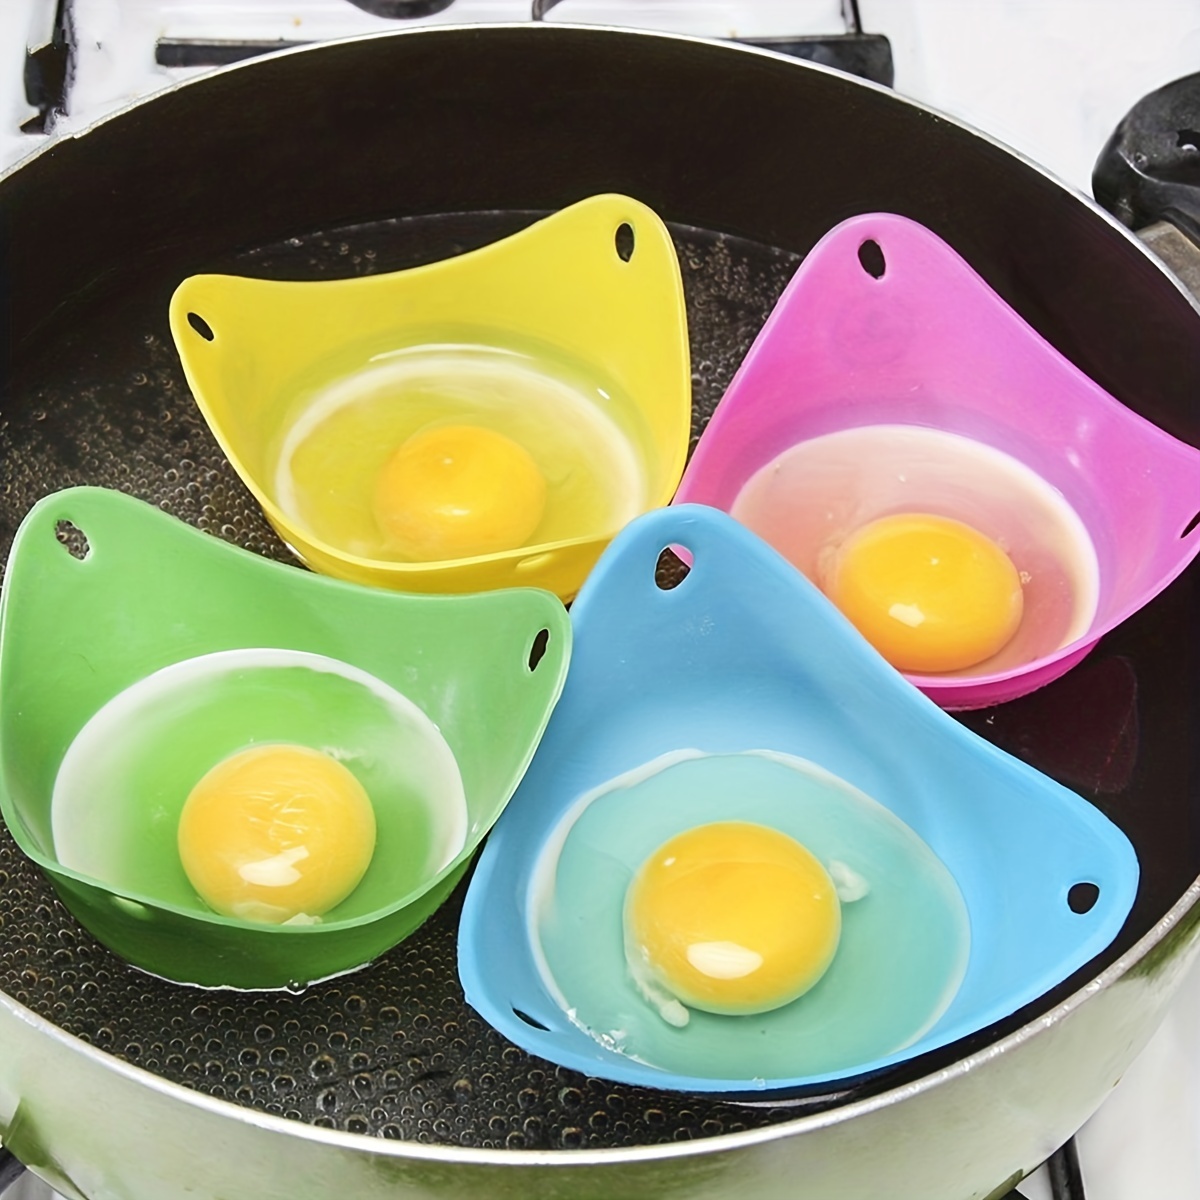 

4pcs, Cook Perfect Eggs Every Time With This Silicone Egg Poachers - Cooking Tool, Kitchen Gadgets, Kitchen Accessories